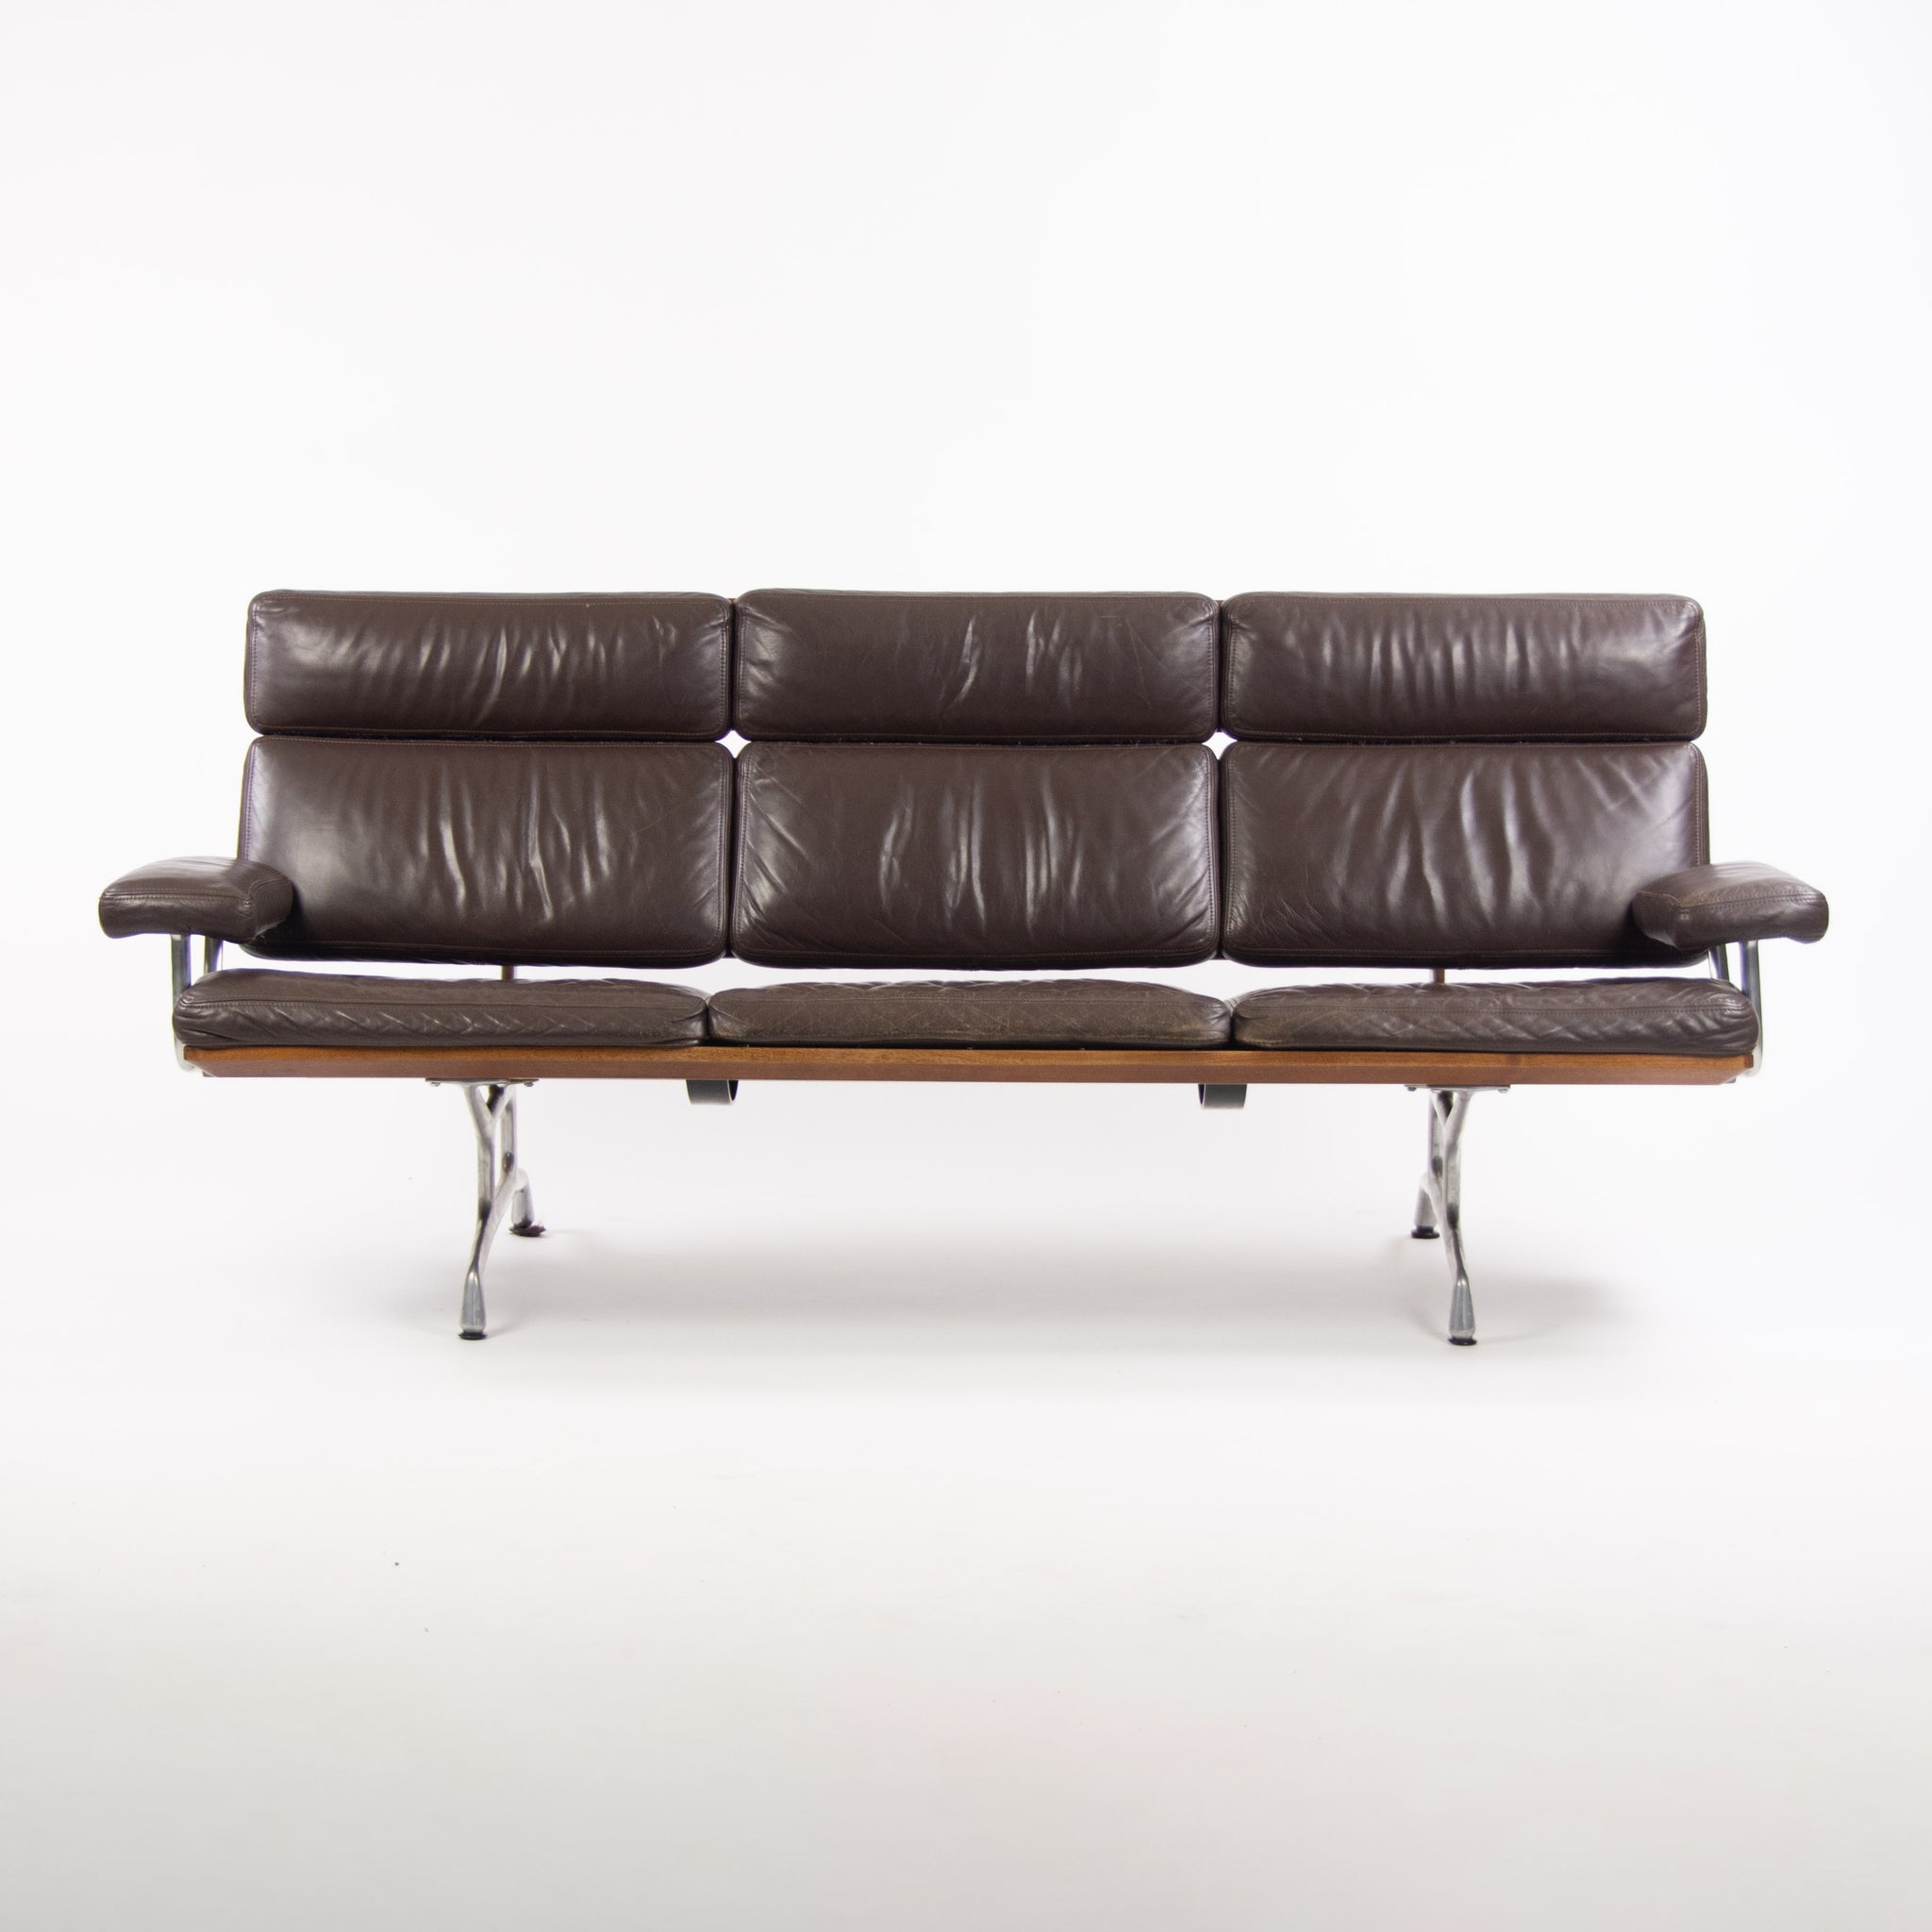 1980s Vintage Eames Herman Miller Three Seater Sofa Walnut and Brown Leather #2